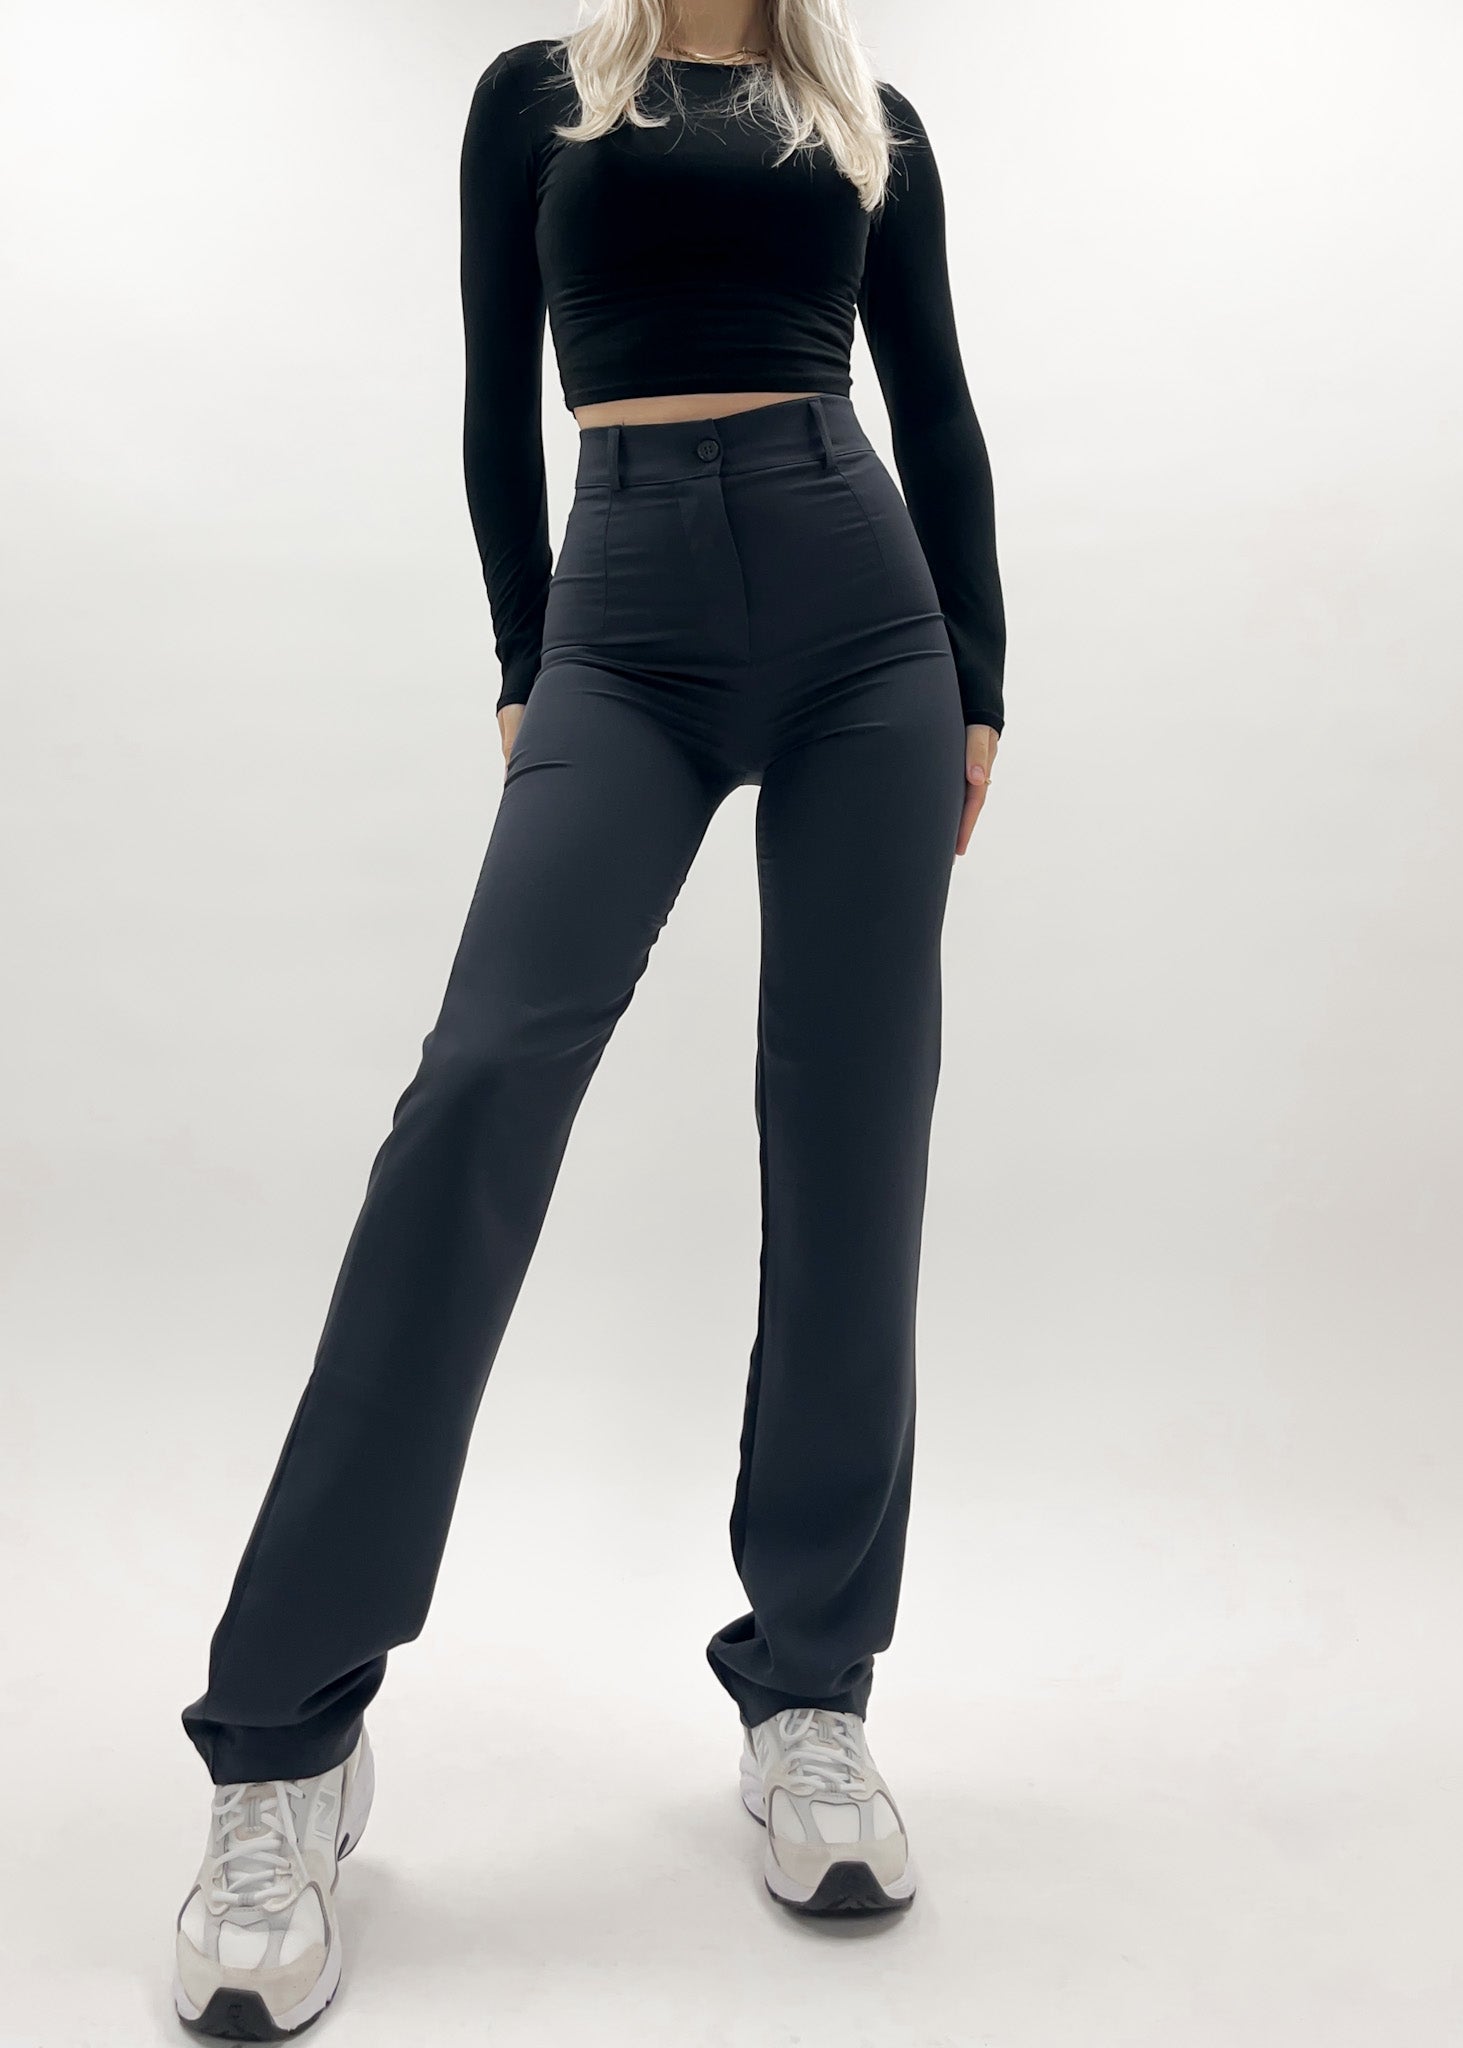 Straight leg pants classic anthracite (TALL)